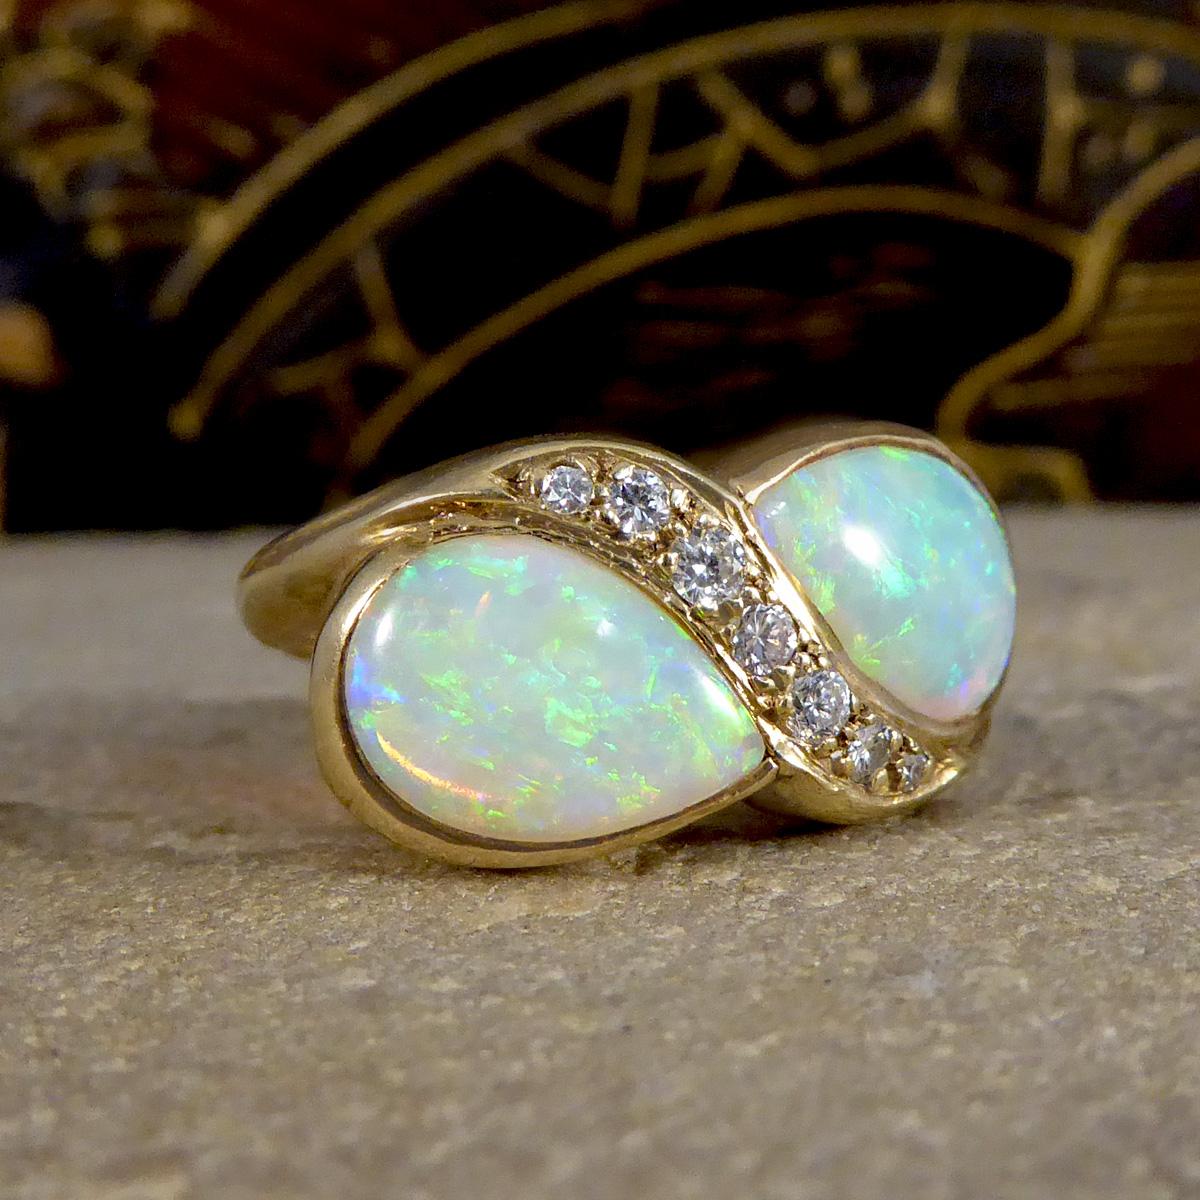 A beautiful vintage twist on a Toi Et Moi style ring. Featuring in this ring are two very bright and colourful Pear cut Diamonds in a rub over setting radiating blues and green with a hint of orange. The two Opals face each other in the centre with